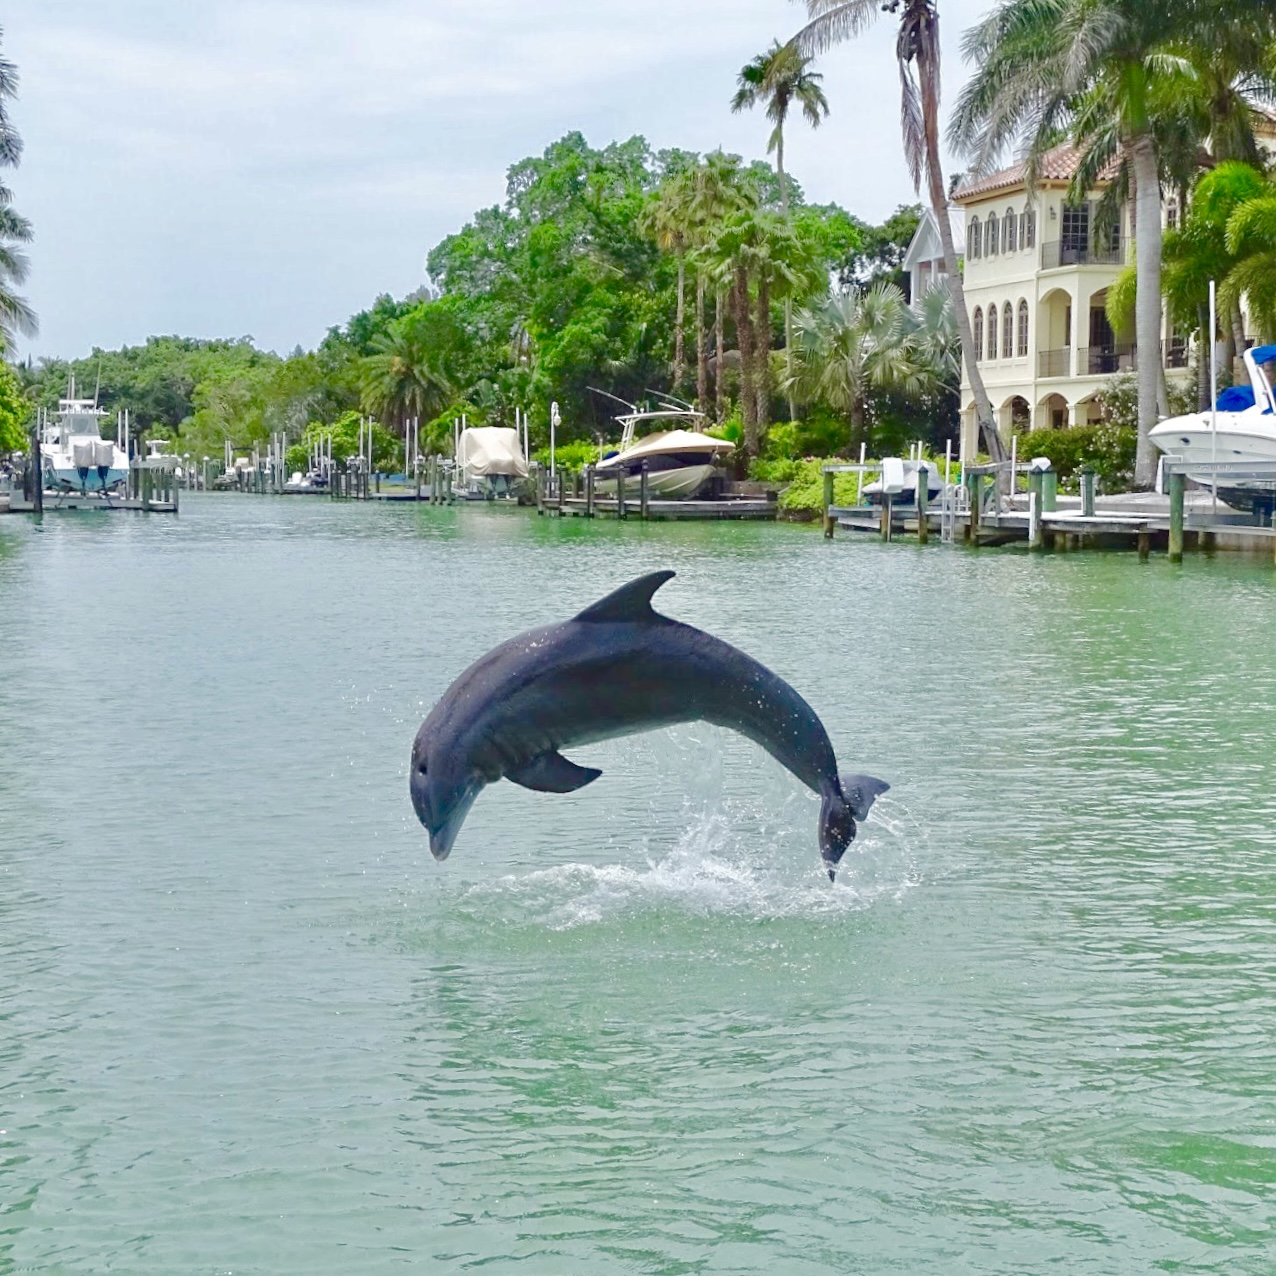 Catch a perfect picture on a Sarasota Dolphin Tour.